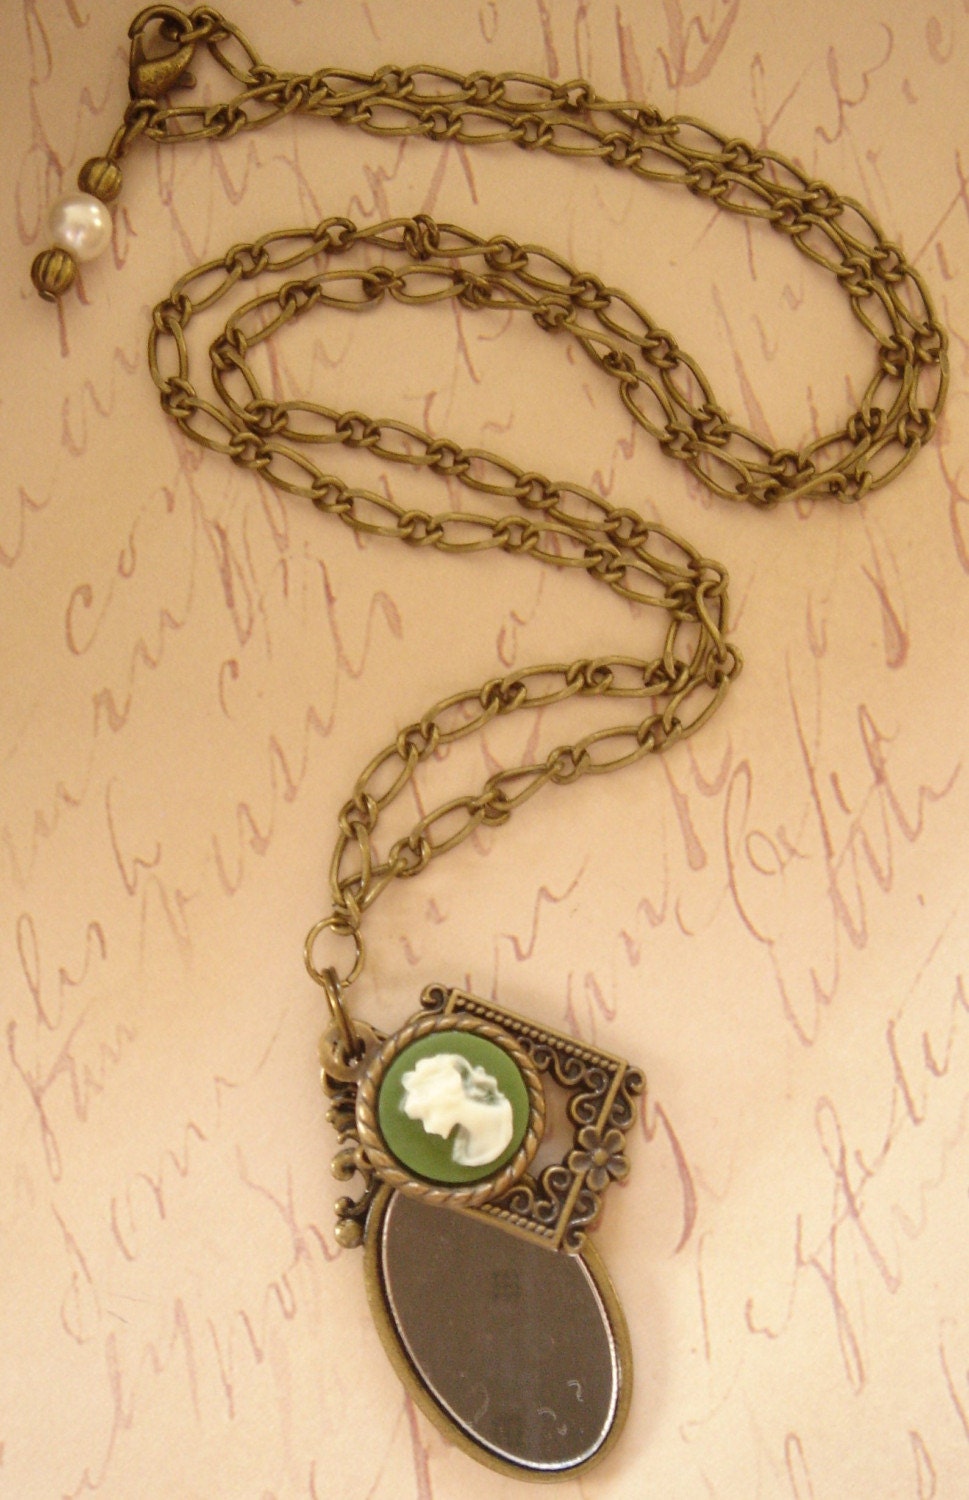 Refelctions in Time Necklace